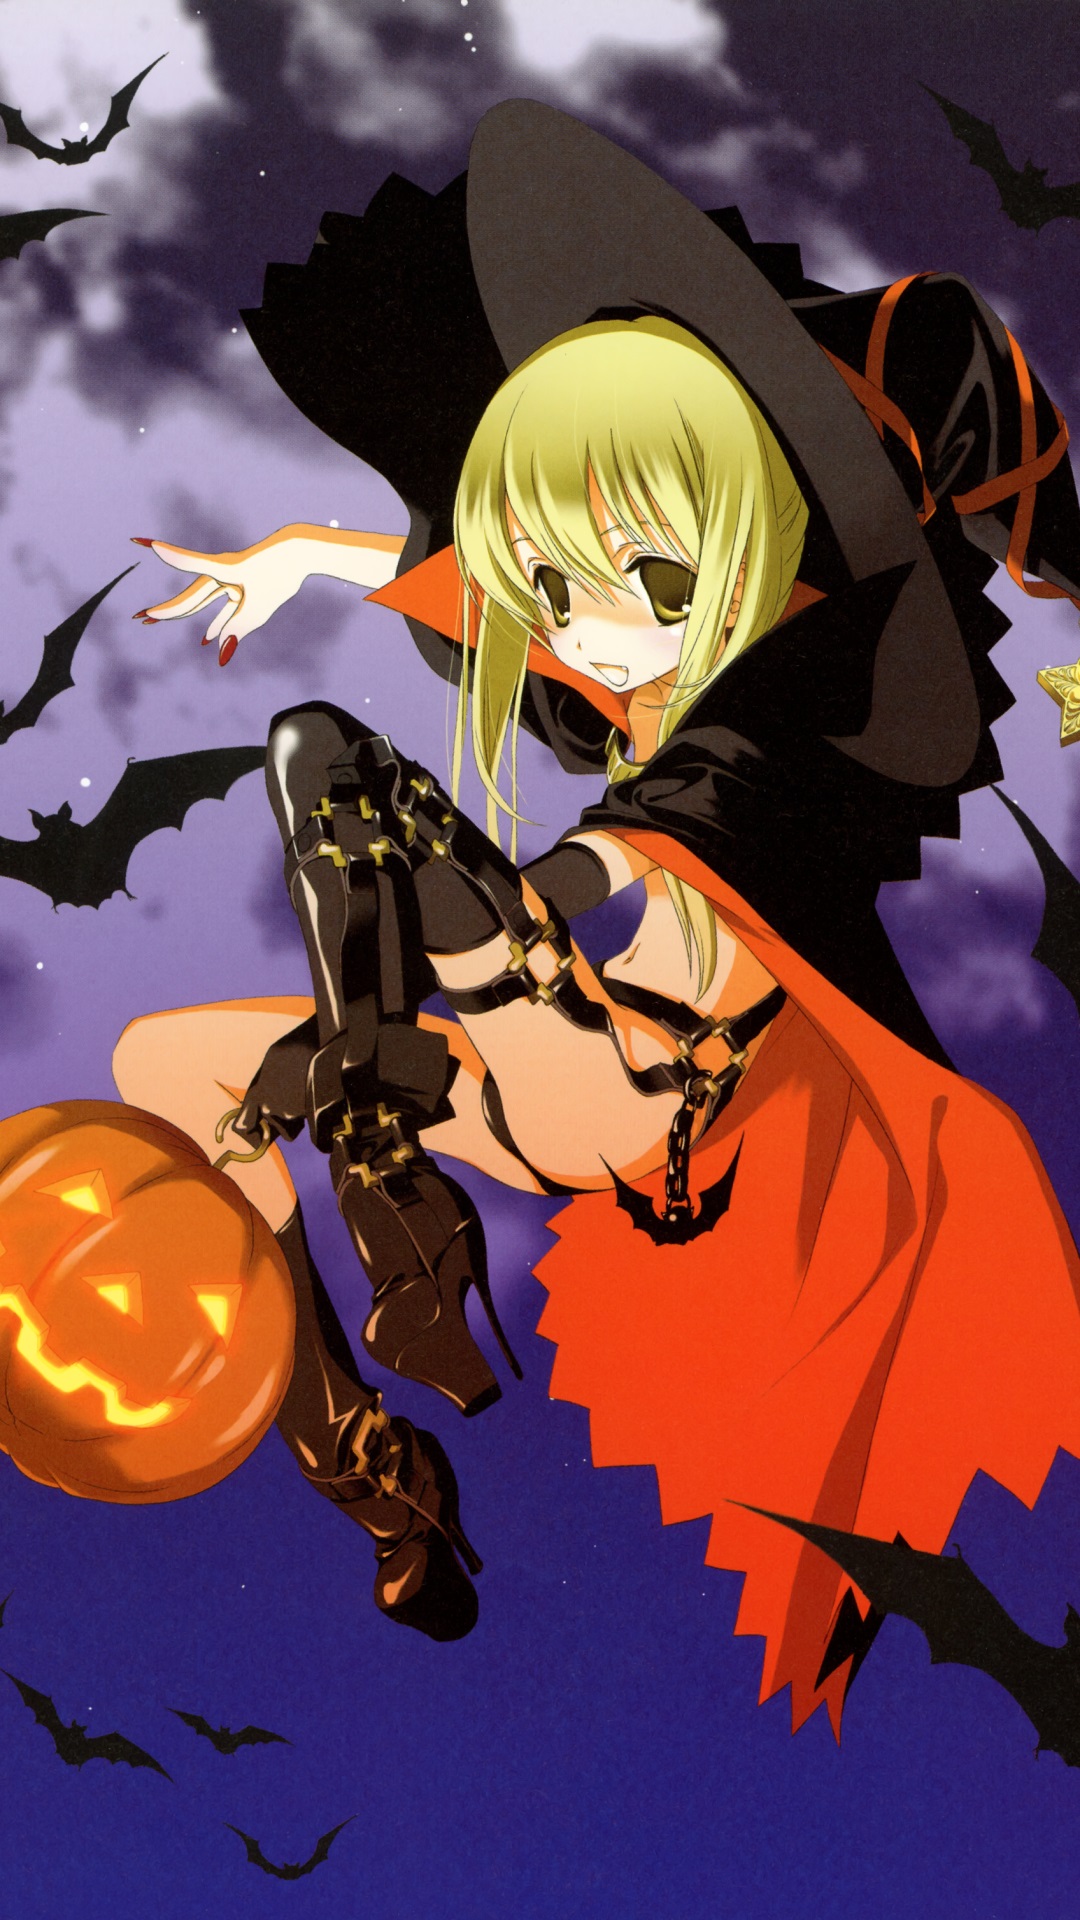 Discover 145+ matching anime halloween pfp super hot - awesomeenglish.edu.vn